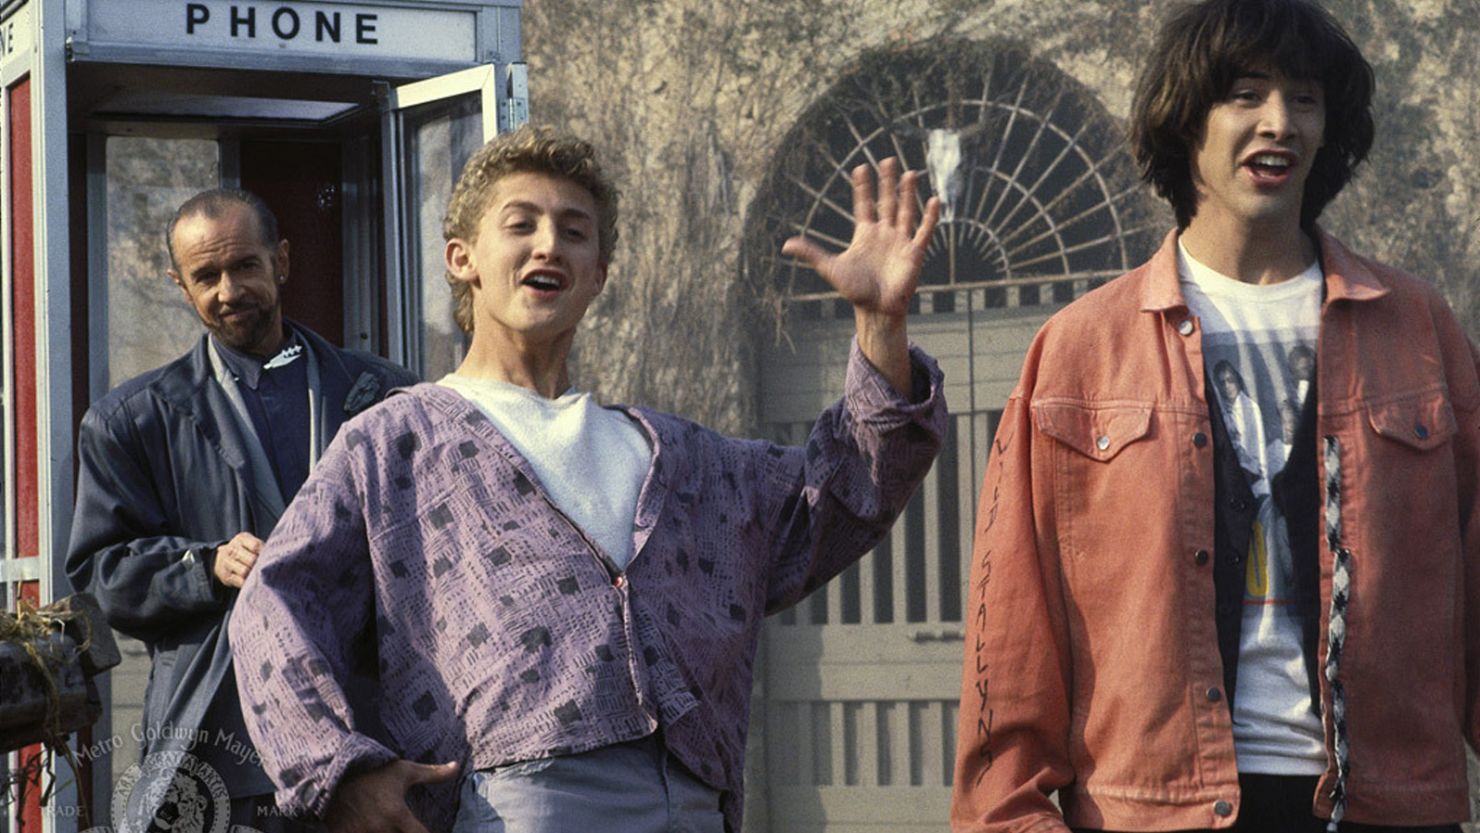 'Bill & Ted's Excellent Adventure' debuted in 1989